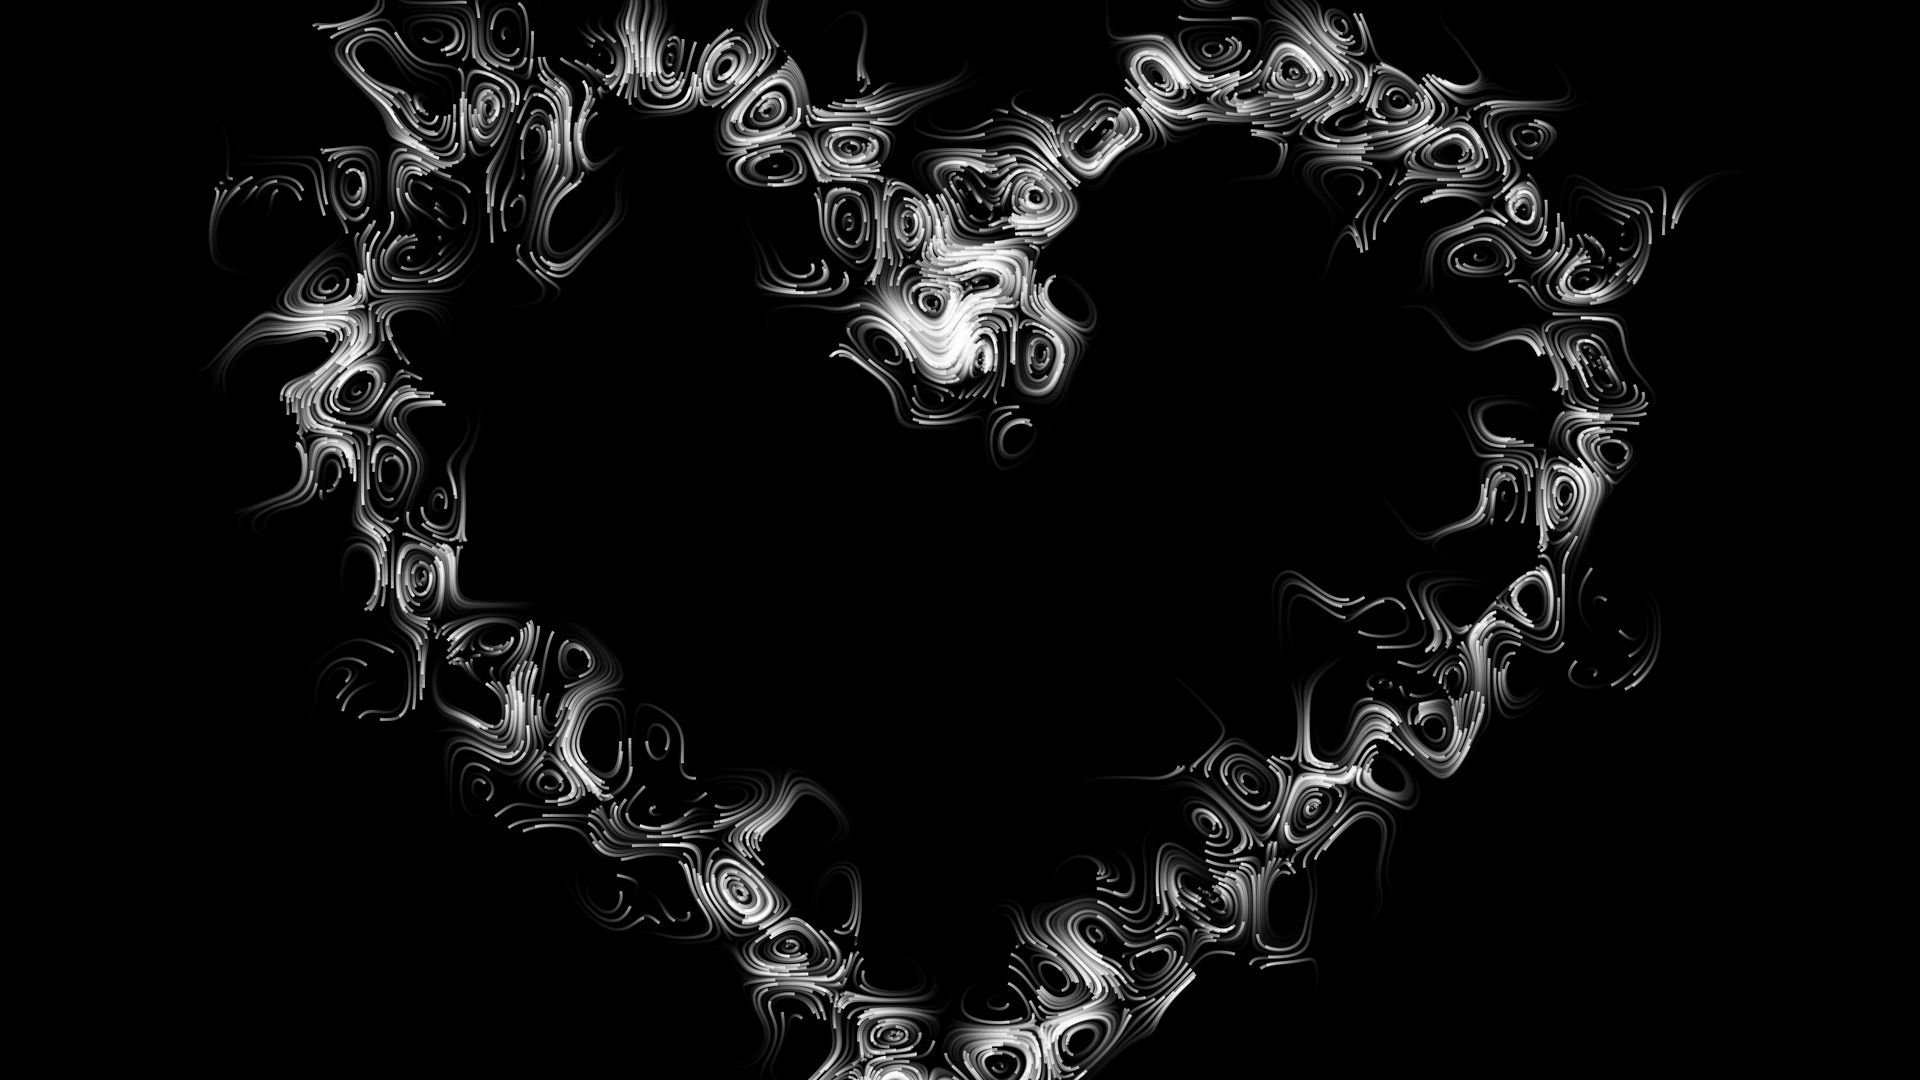 Download wallpaper 1920x1080 heart, circles, stains, black full hd, hdtv,  fhd, 1080p hd background